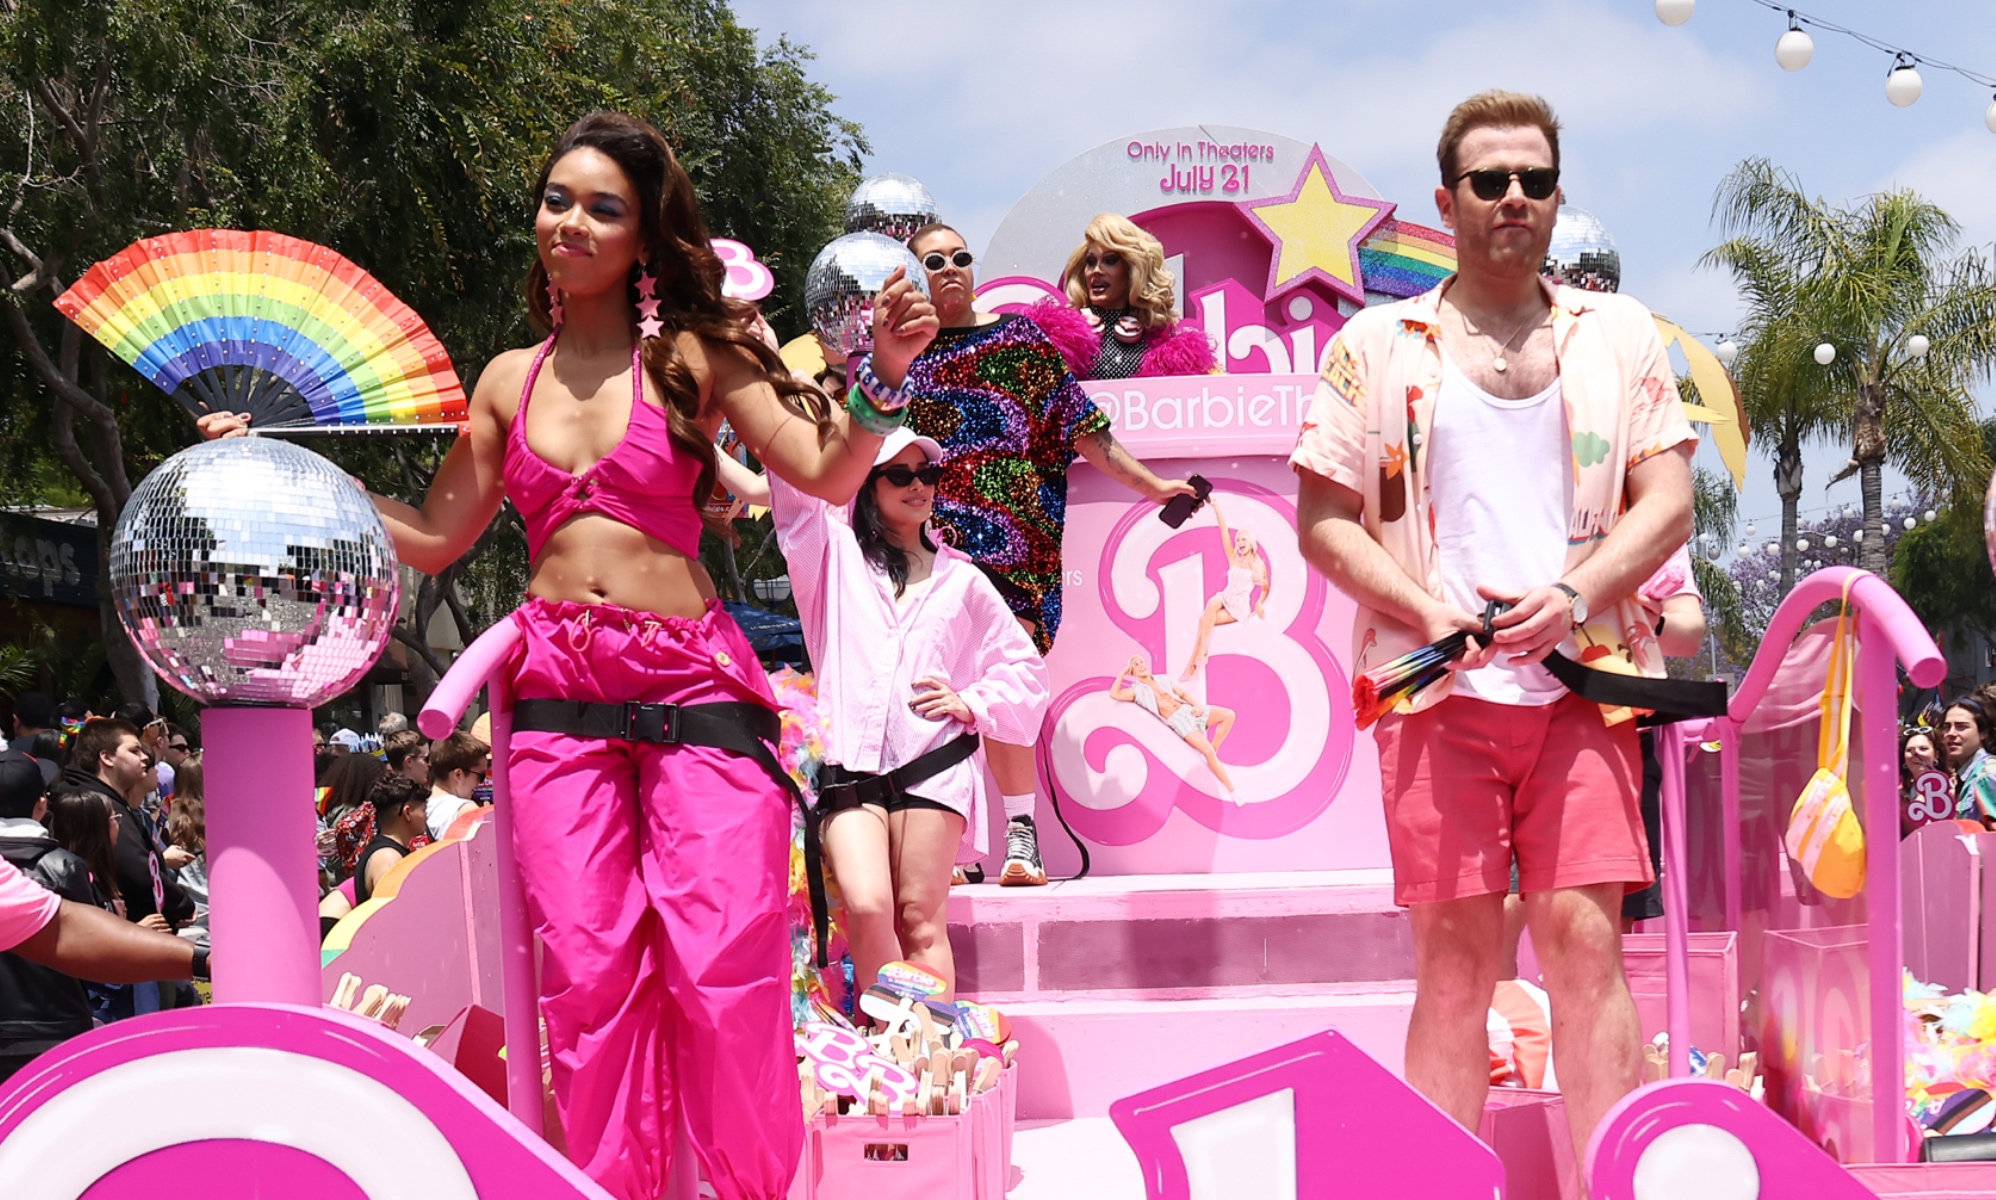 https://www.thepinknews.com/wp-content/uploads/2023/06/Barbie-Alexandra-Shipp-L-and-Scott-Evans-R-brought-the-camp-to-WeHos-Pride-parade.-Getty.jpg